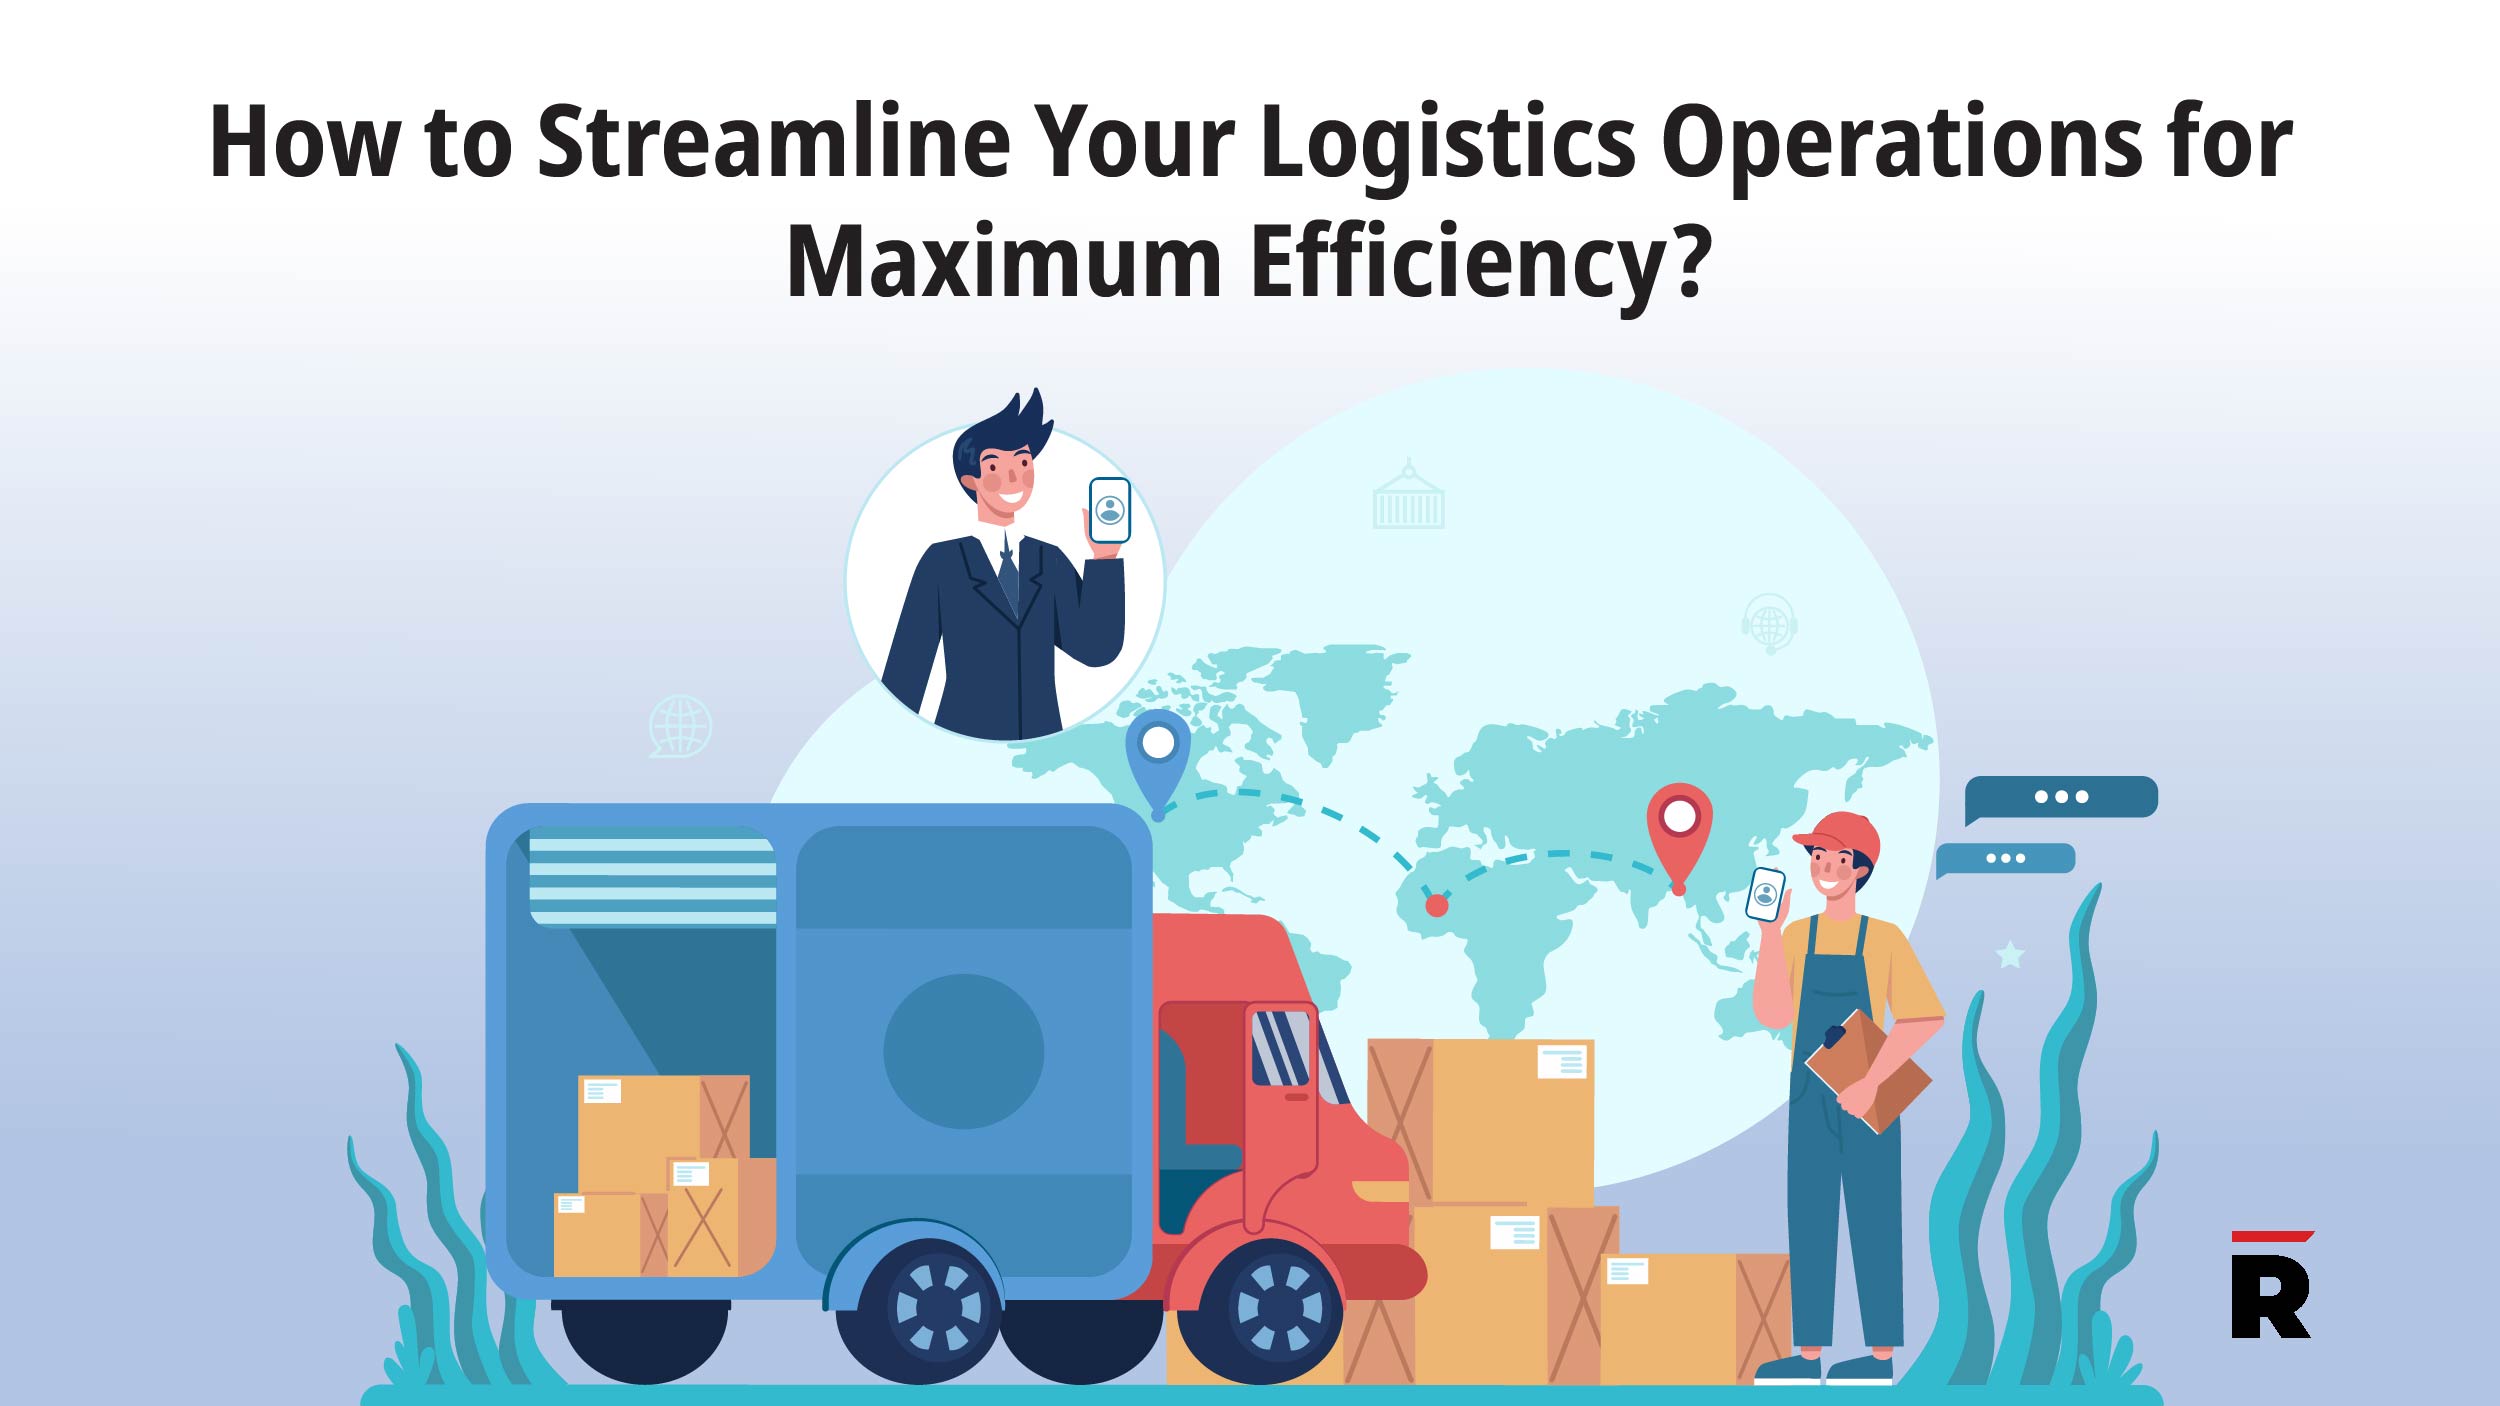 How to Streamline Your Logistics Operations for Maximum Efficiency?